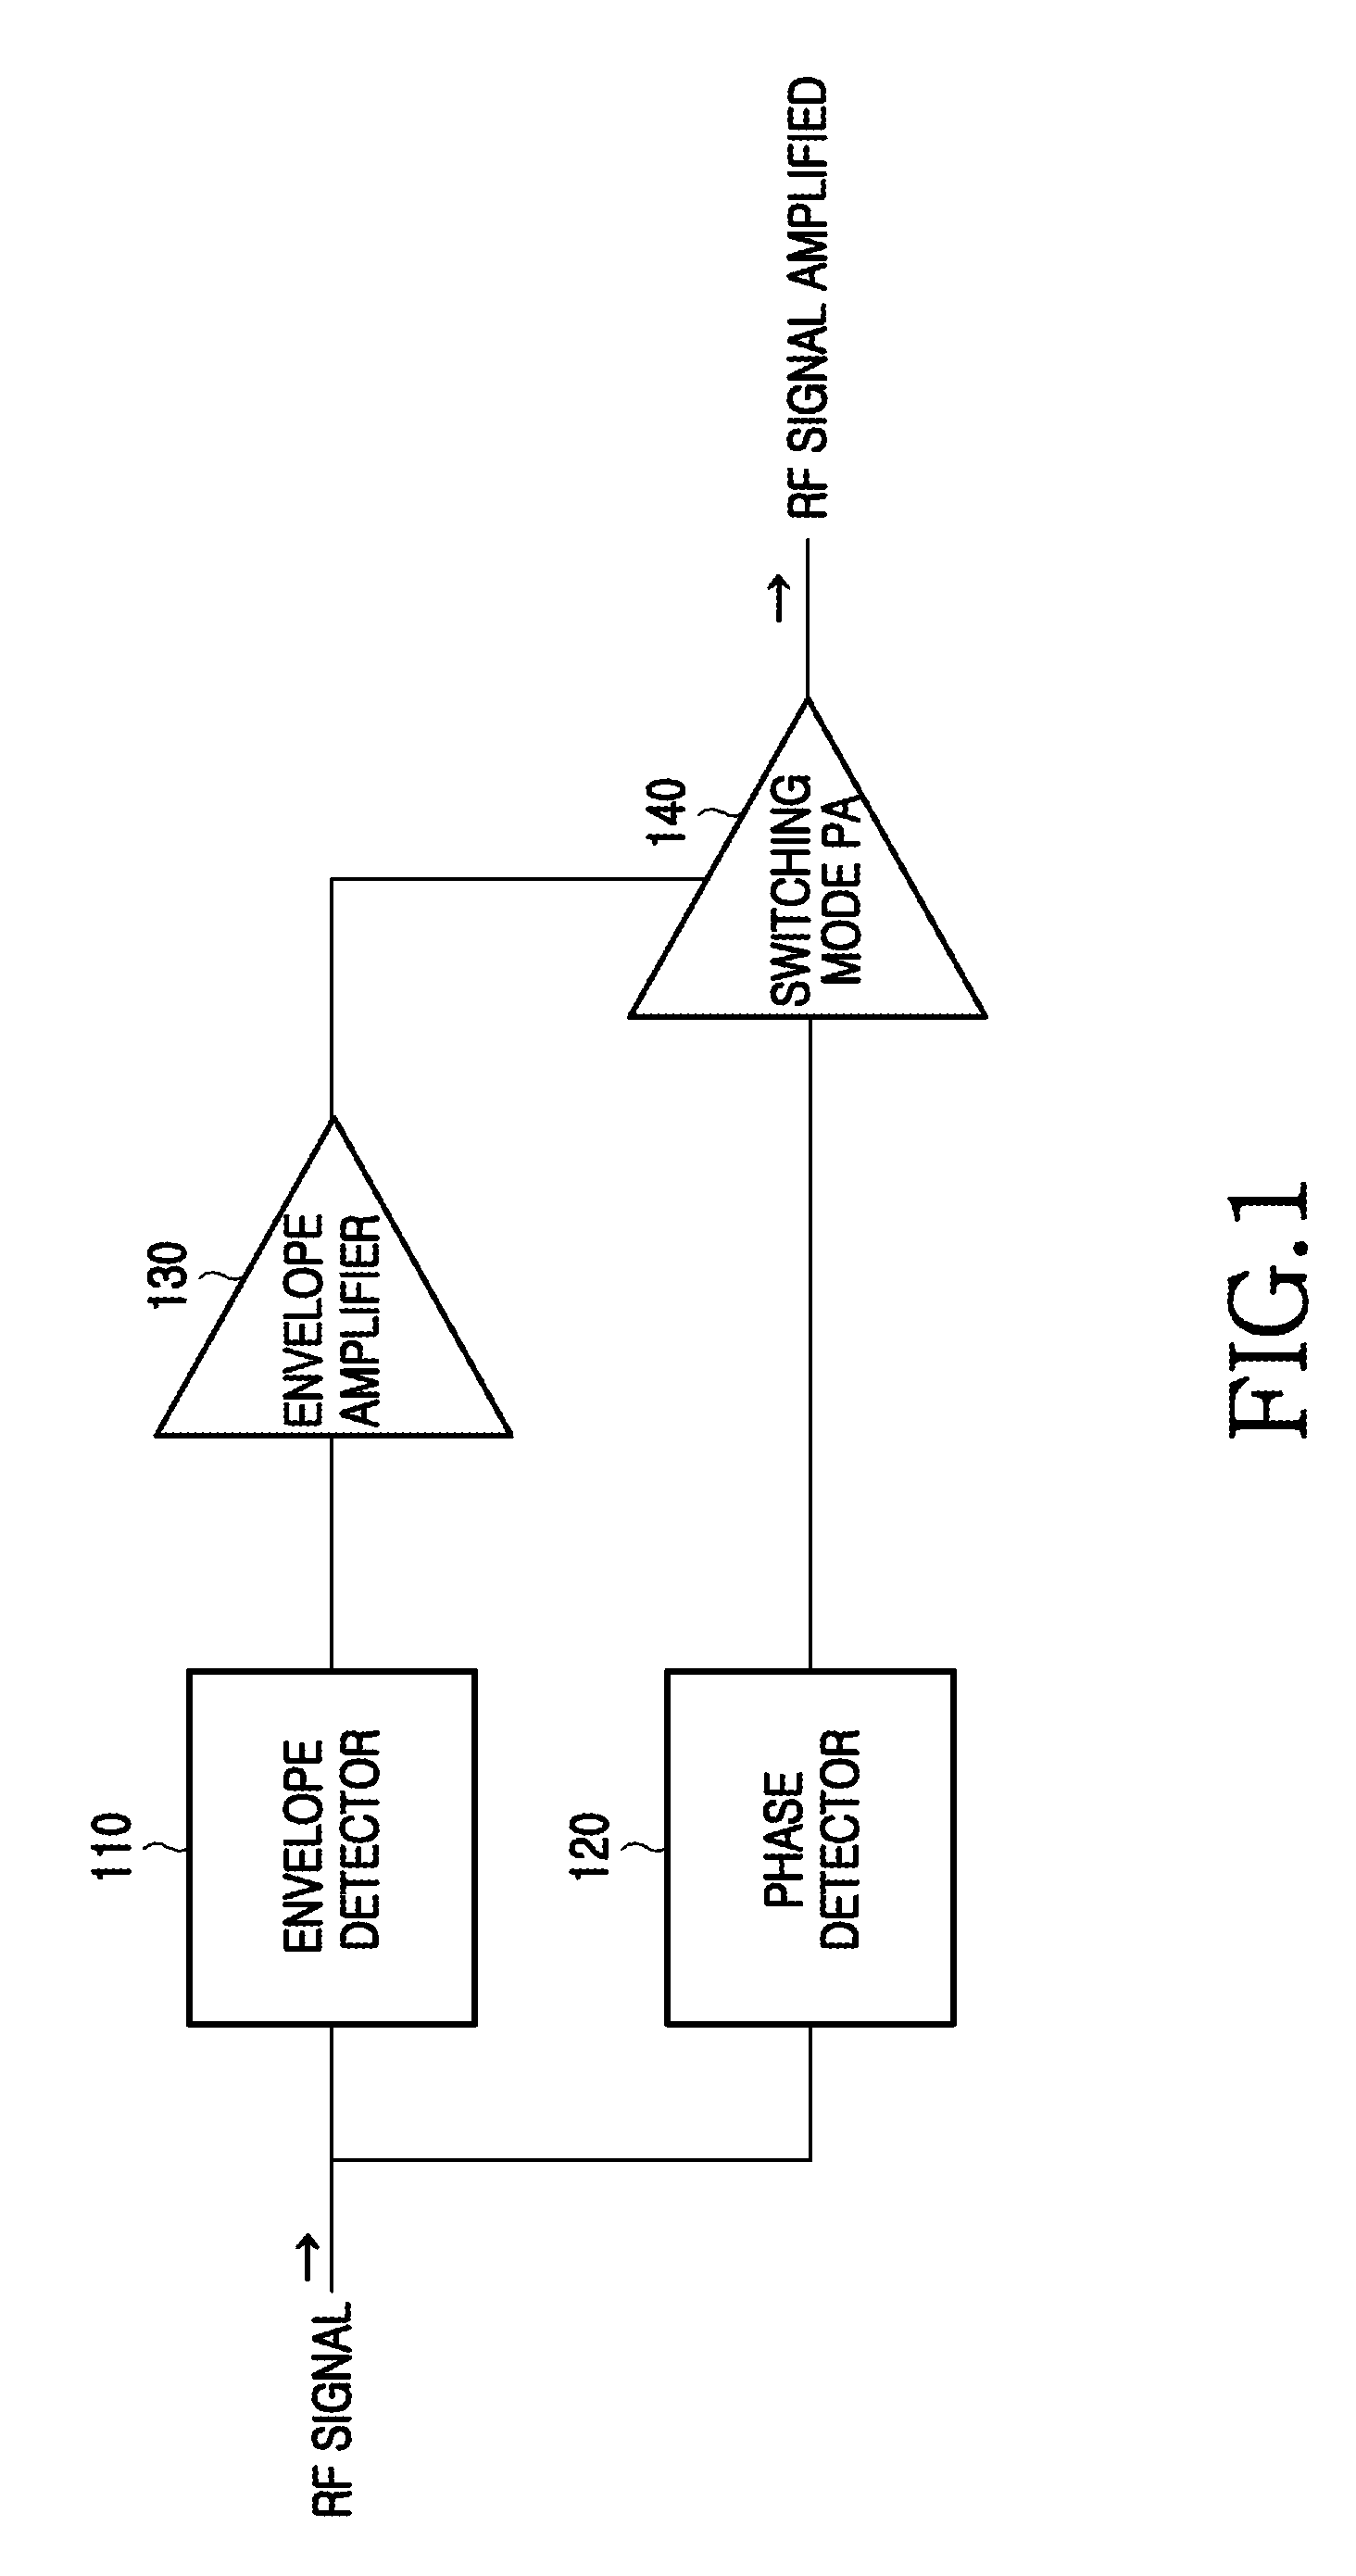 Apparatus for power amplification based on envelope elimination and restoration (EER) and push-pull switching